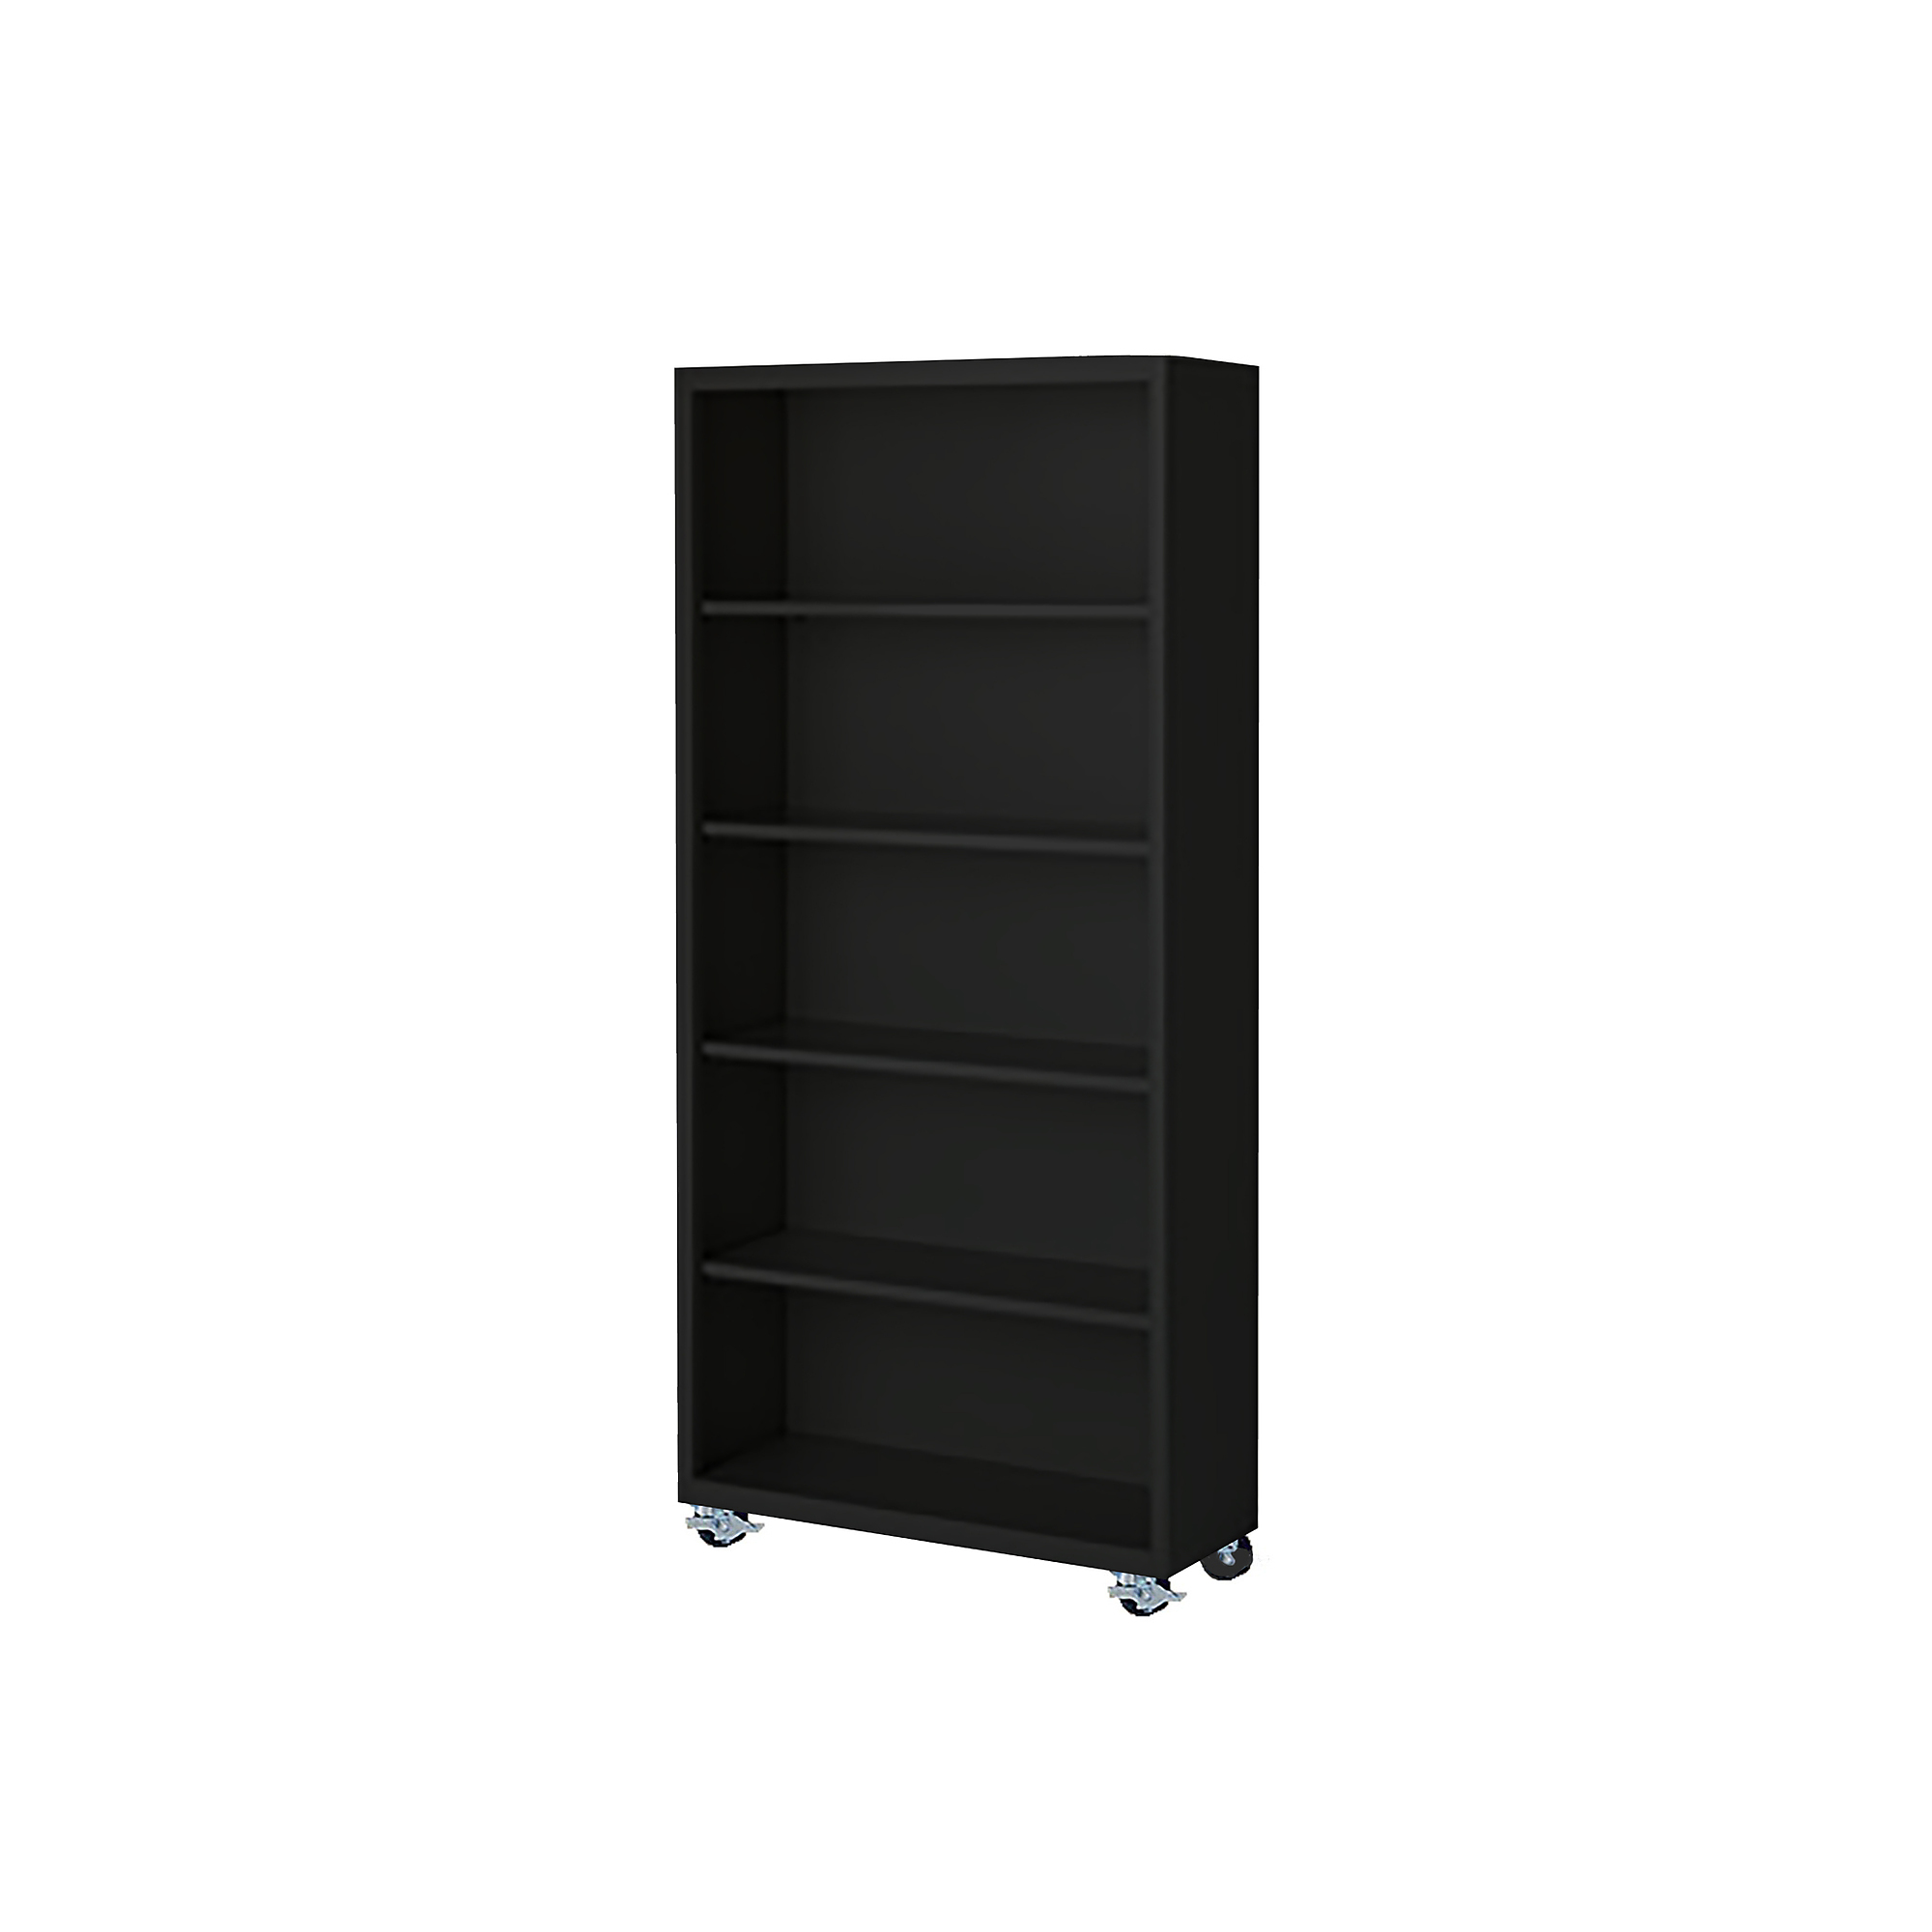 Steel Cabinets USA, 36Inchx18Inchx75Inch Black Mobile Bookcase Full Assembled, Height 75 in, Shelves (qty.) 5, Material Steel, Model MBCA-367518-B